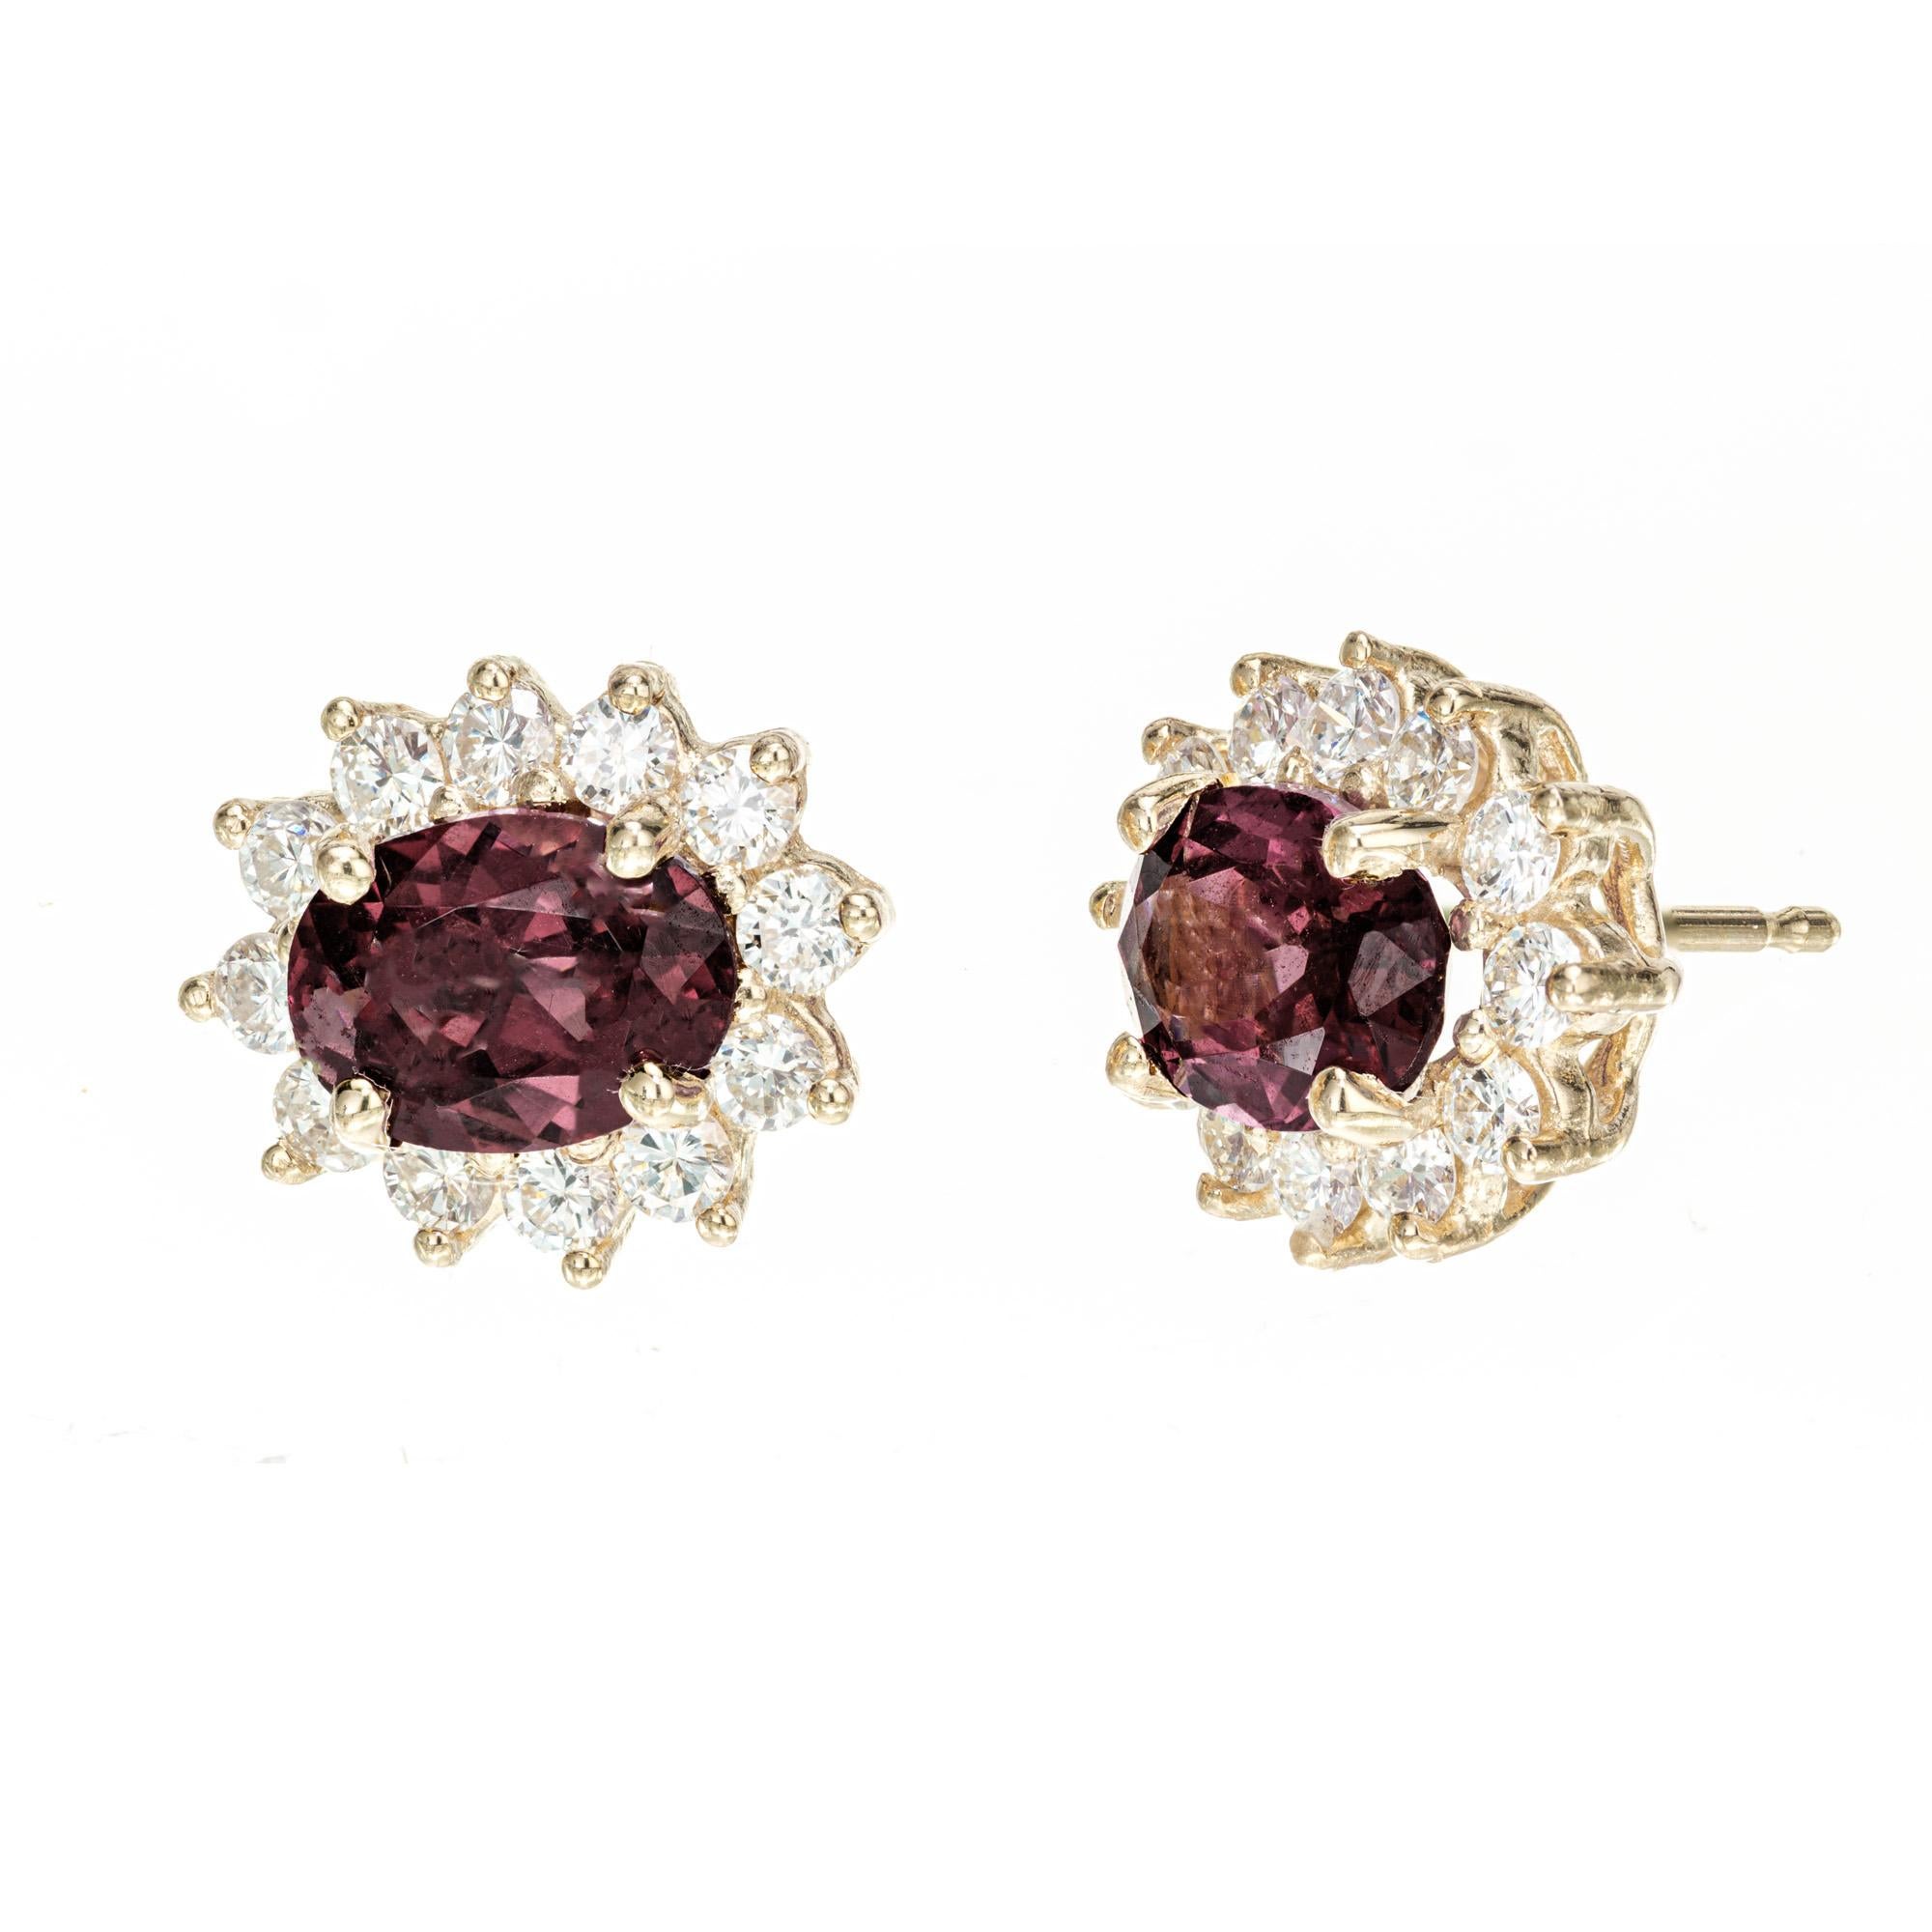 Natural color rhodlite garnet and diamond earrings. 2 oval purple red rhodolites set in 14k yellow gold four prong settings each with a halo of round brilliant cut diamonds. Designed and crafted in the Peter Suchy workshop.

2 oval purplish red